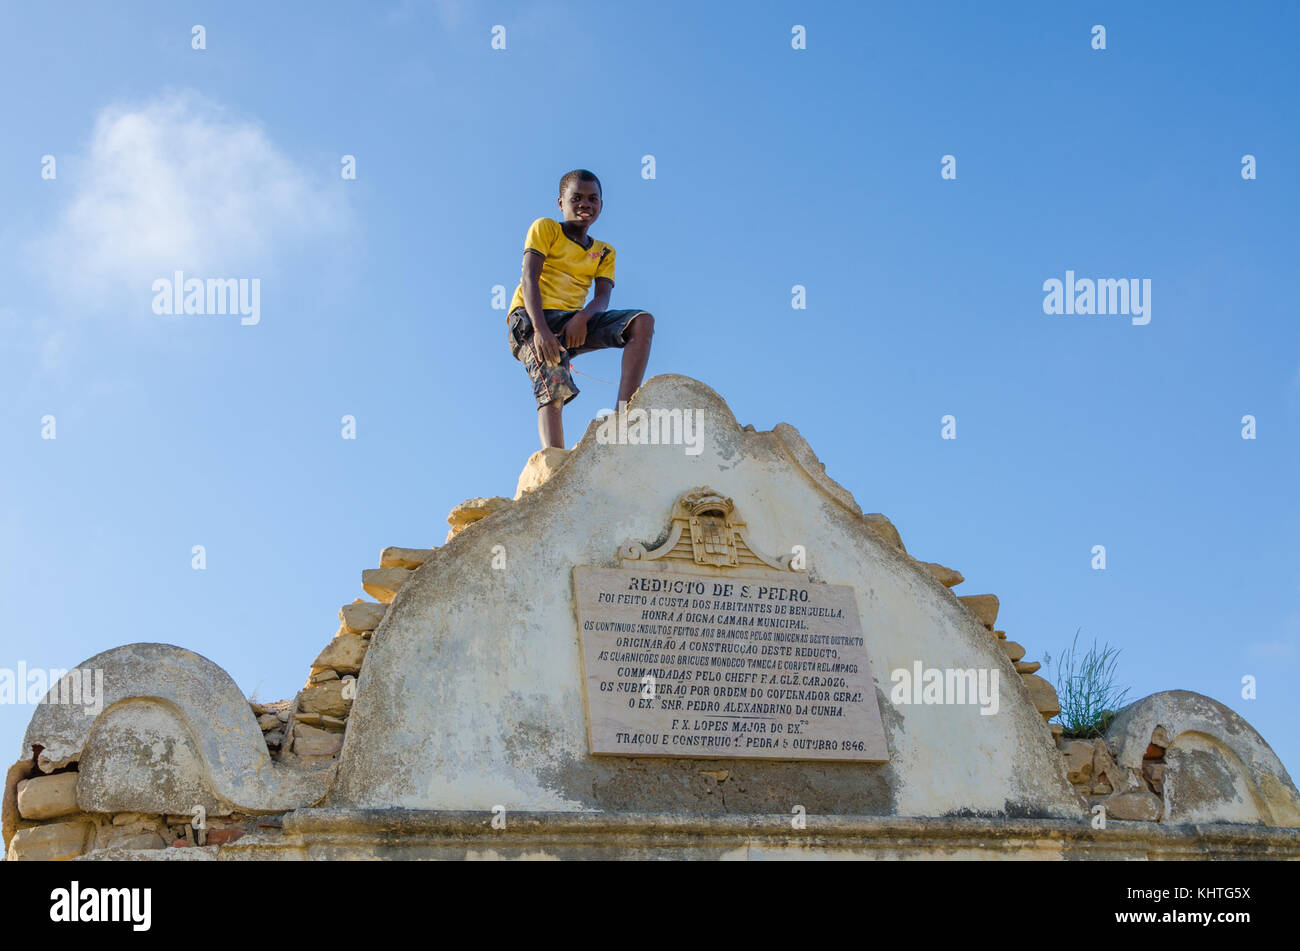 LOBITO, ANGOLA - MAY 09 2014: Unidentified African boy with yellow shirt standing on Reducto Sao Pedro Portuguese fort Stock Photo